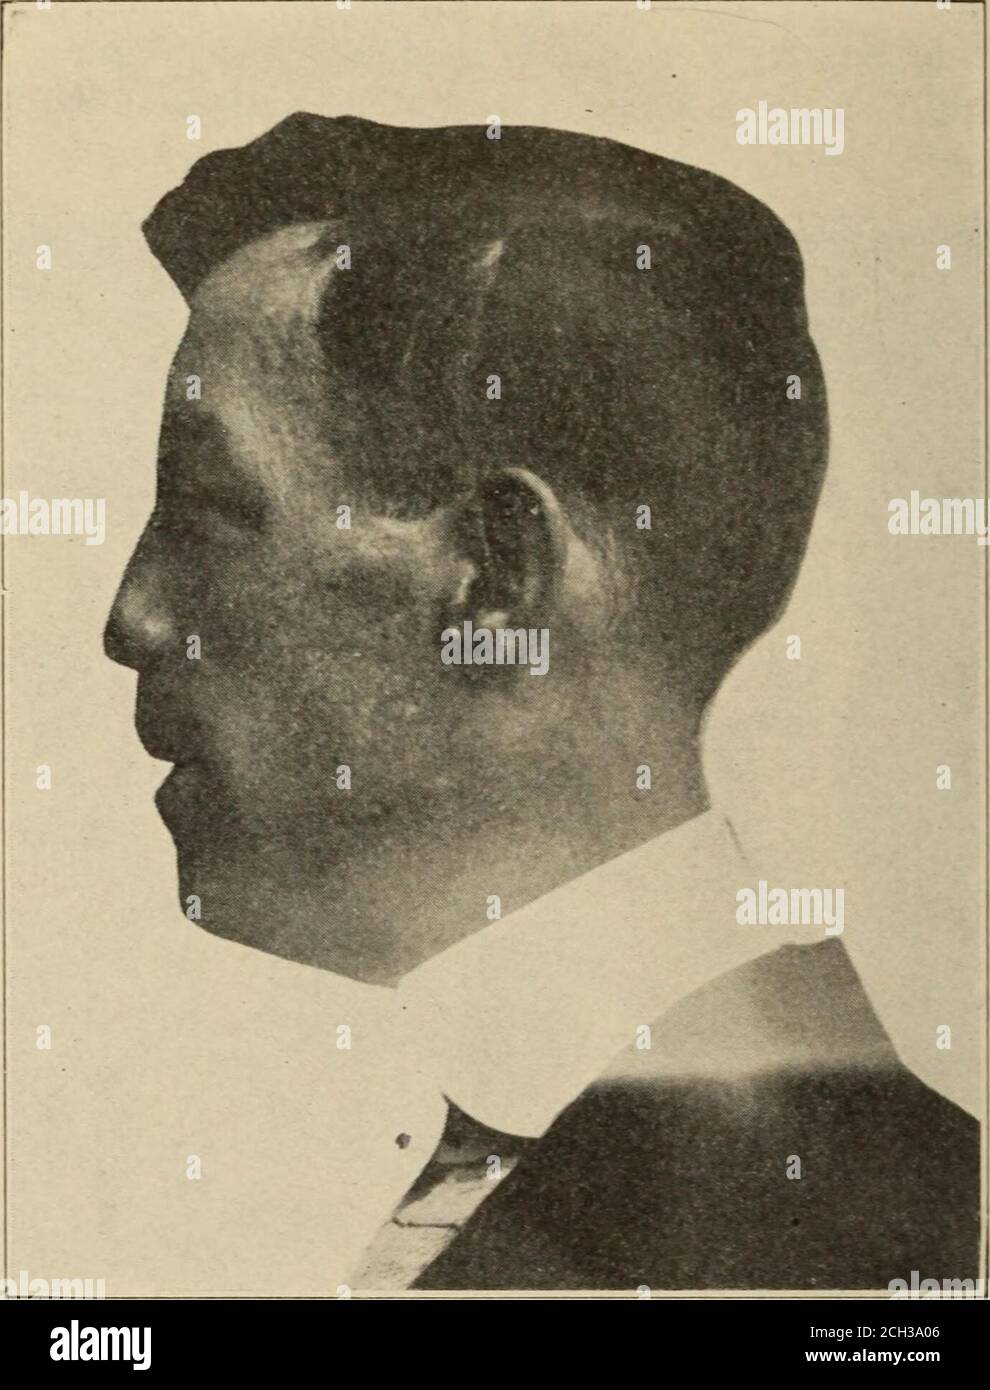 . The Hahnemannian monthly . Fig. 1.—Before Operation. ity, I had an opportunity to try the operation upon an appro-priate case, with very good results. The patient, a man thirty-two years of age, was infected with lues eleven years ago. Theseptum of the nose was affected and destroved and a marked 266 The Hahncmannuin Monthly [April, depression of the nasal bones followed. There were no activesigns of the disease at the time of operation and no breakin the mucus membrane of the nose. A wax model of thesize and shape of the defect was made, an oblique incision wasthen made over the seventh cos Stock Photo